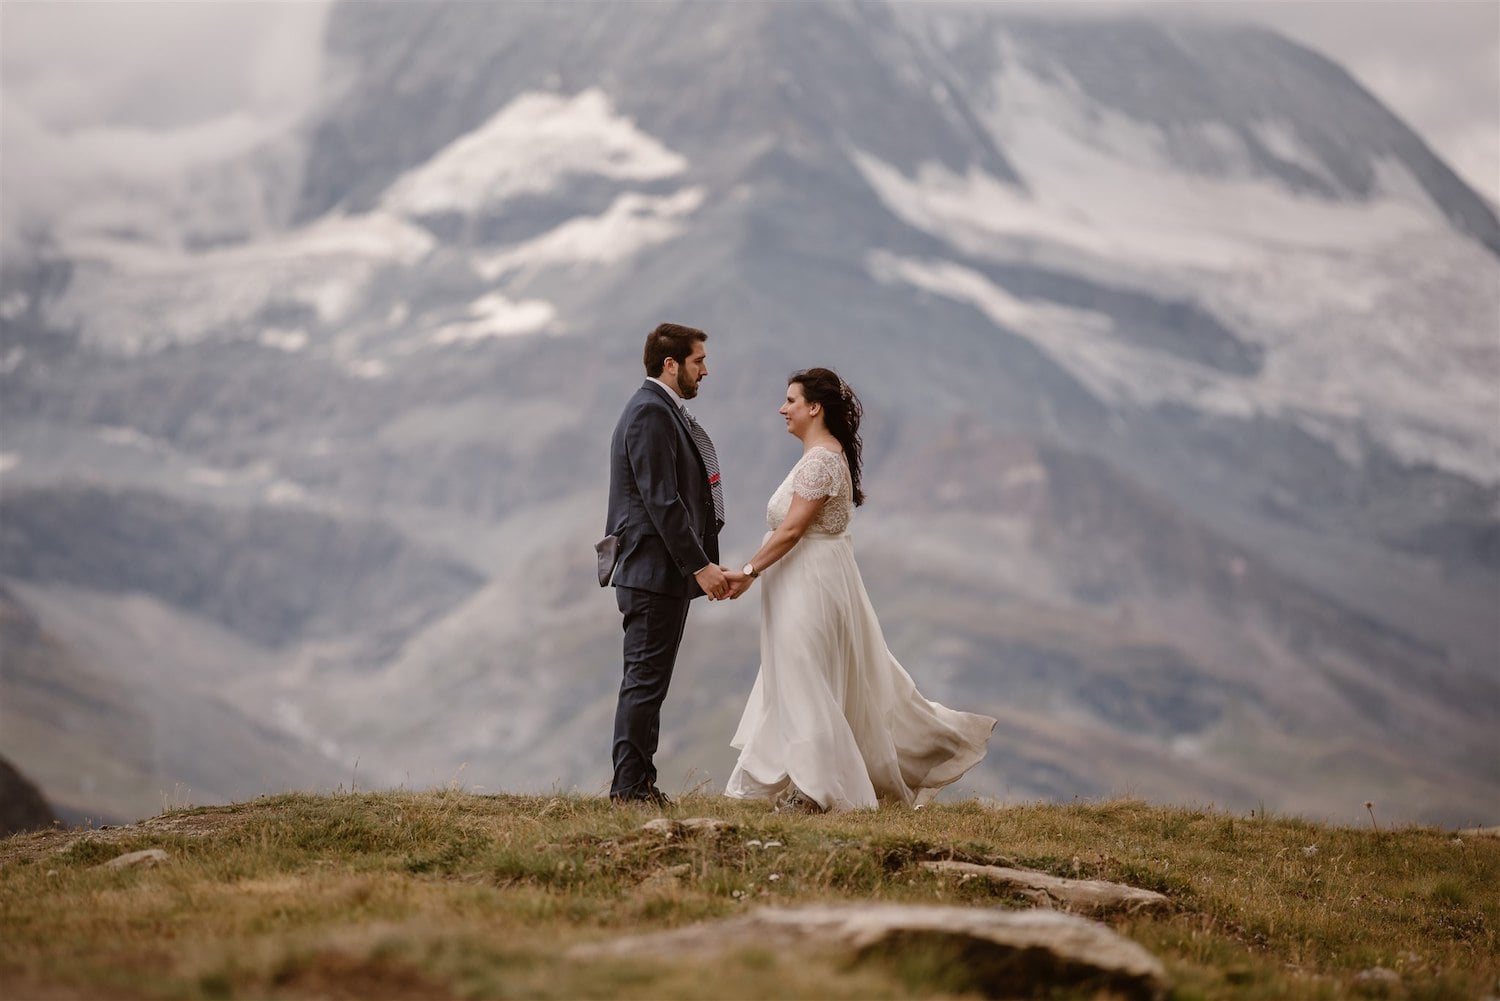 Newlyweds holing hands after their commitment ceremony in Zermatt